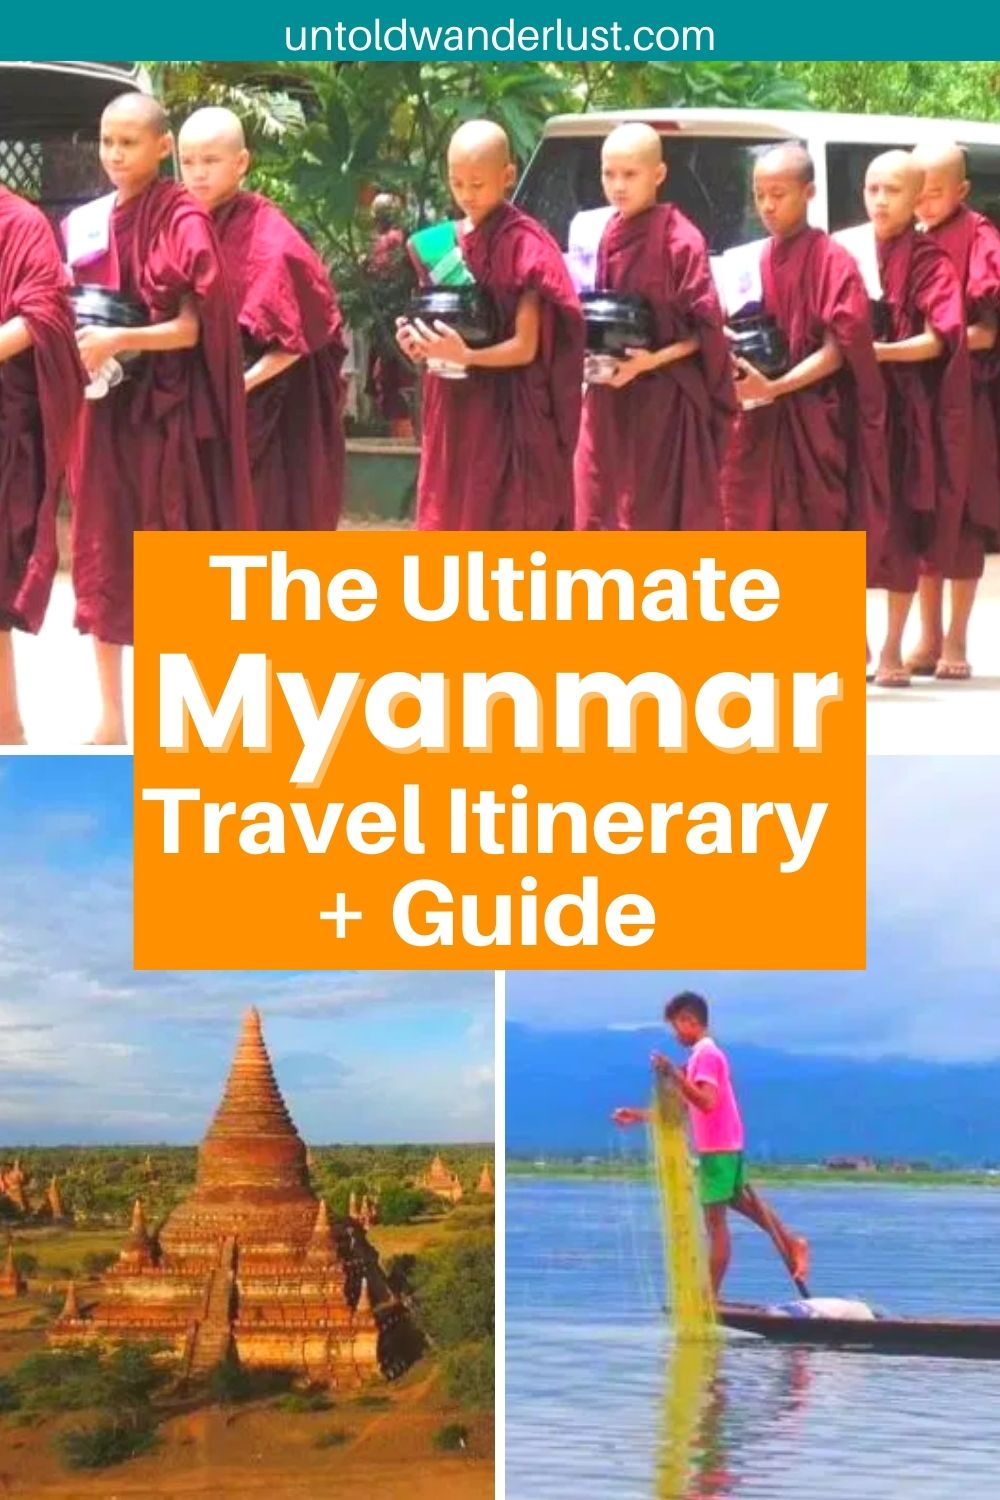 The Ultimate Myanmar Travel Itinerary + Guide